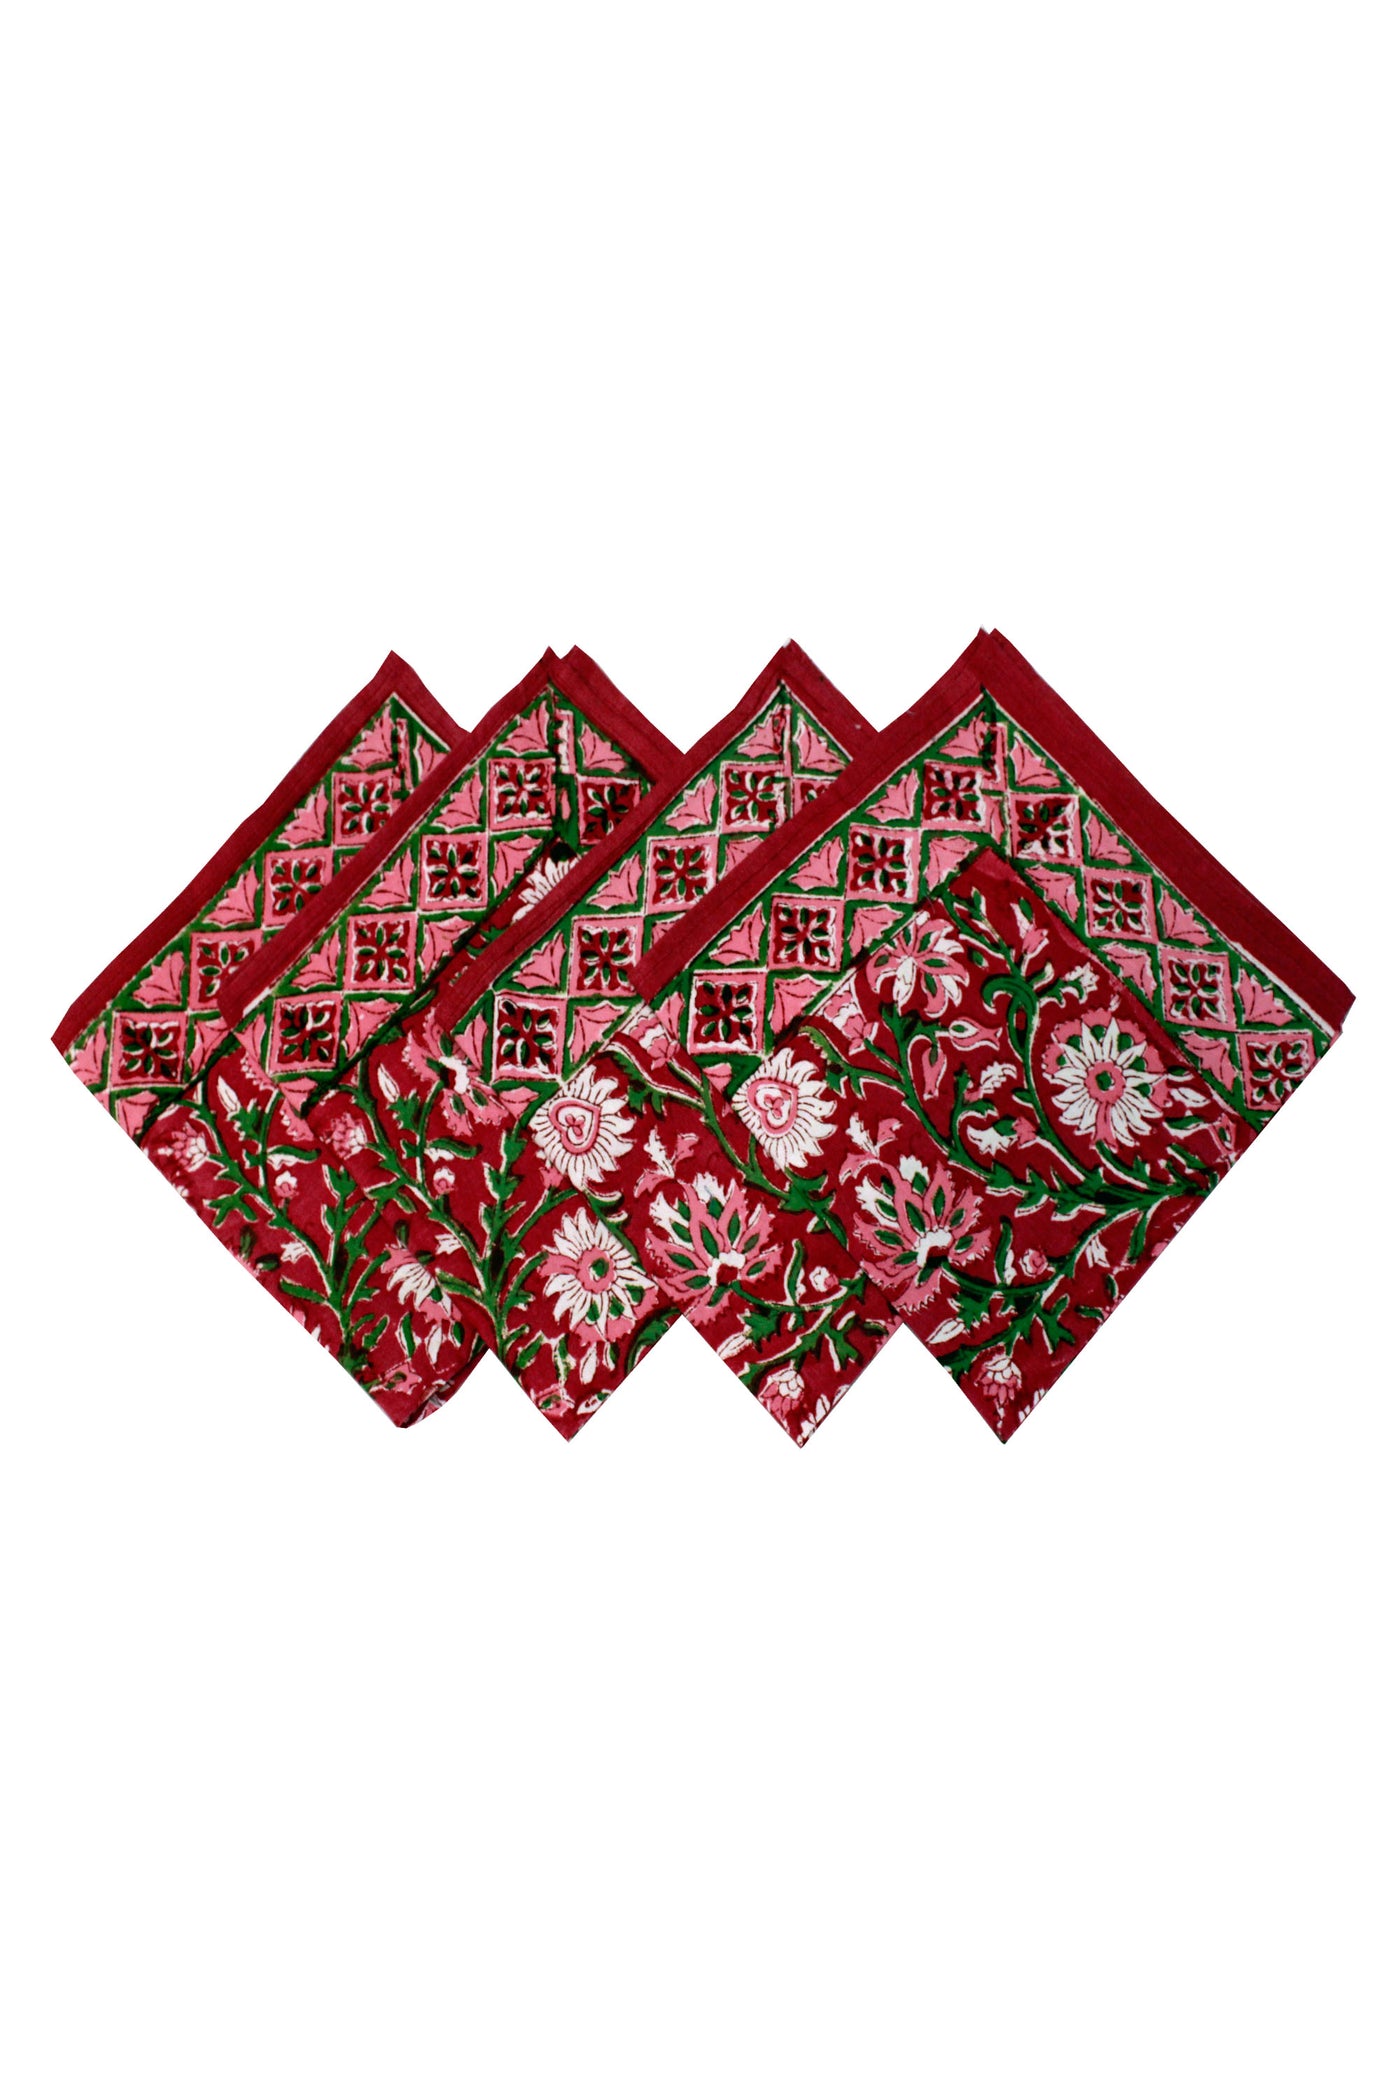 Mughal Flower Jaal Hand Block Table Napkin in Red